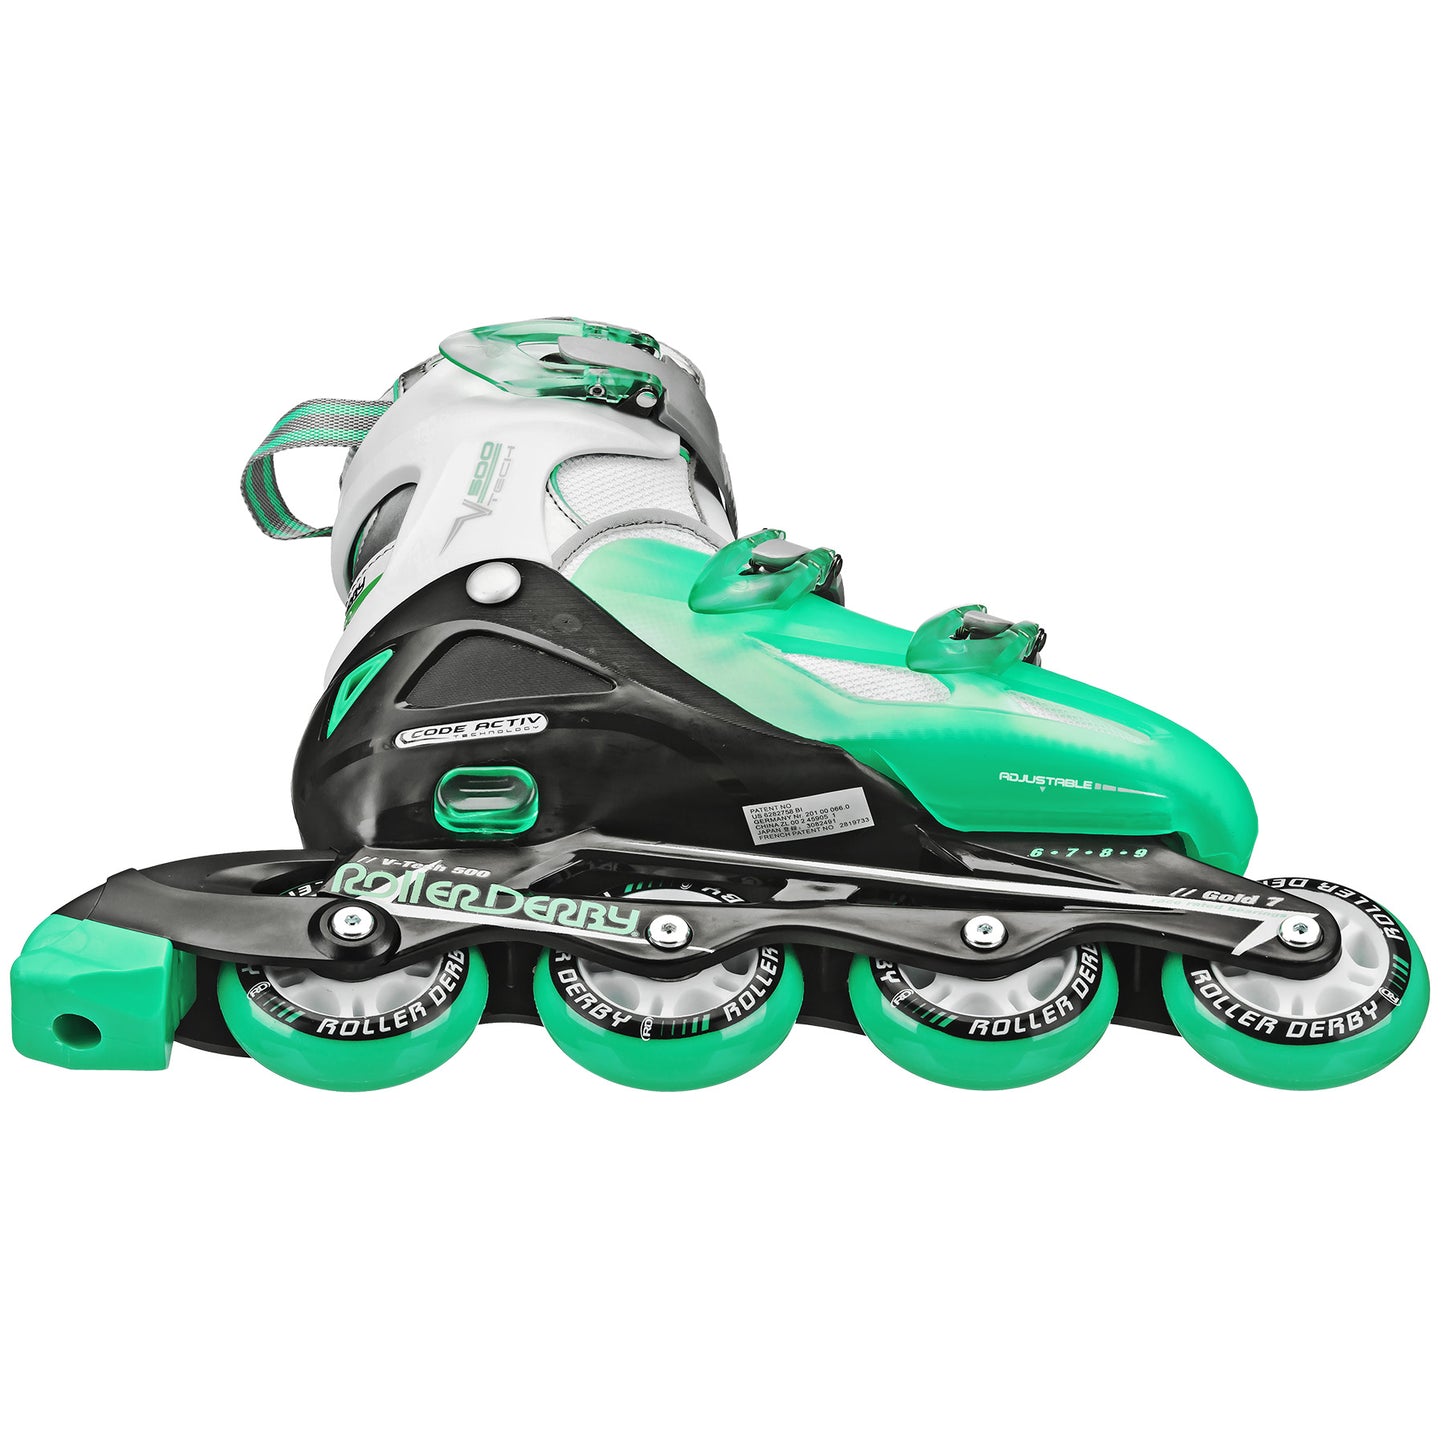 V-Tech 500 Women's Inline Skates with Adjustable Sizing